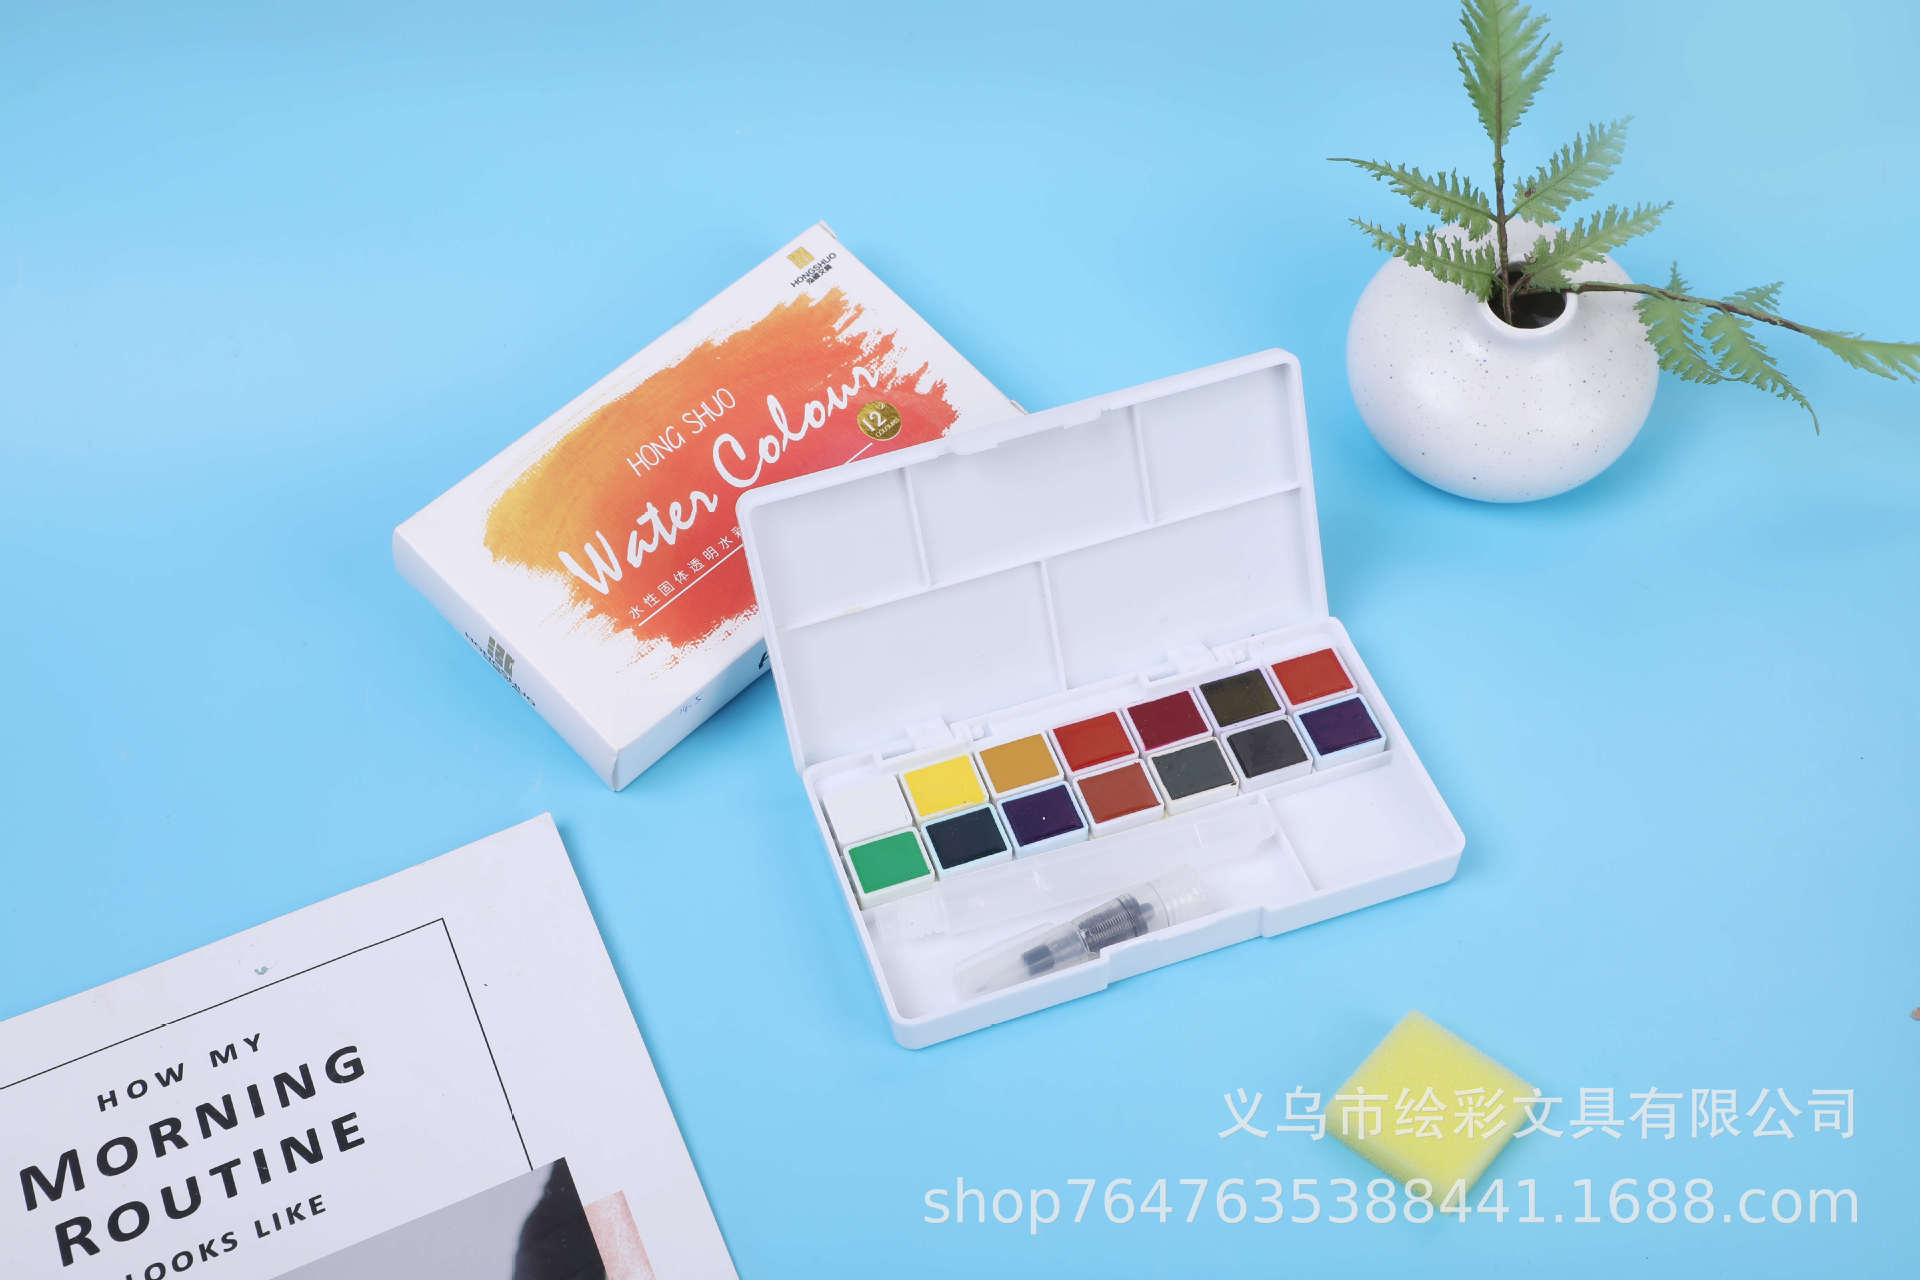 36 Colors Beginner Entry Solid 12 Colors Watercolor Powder 24 Colors Suit 28 Colors Solid Watercolor Factory Wholesale